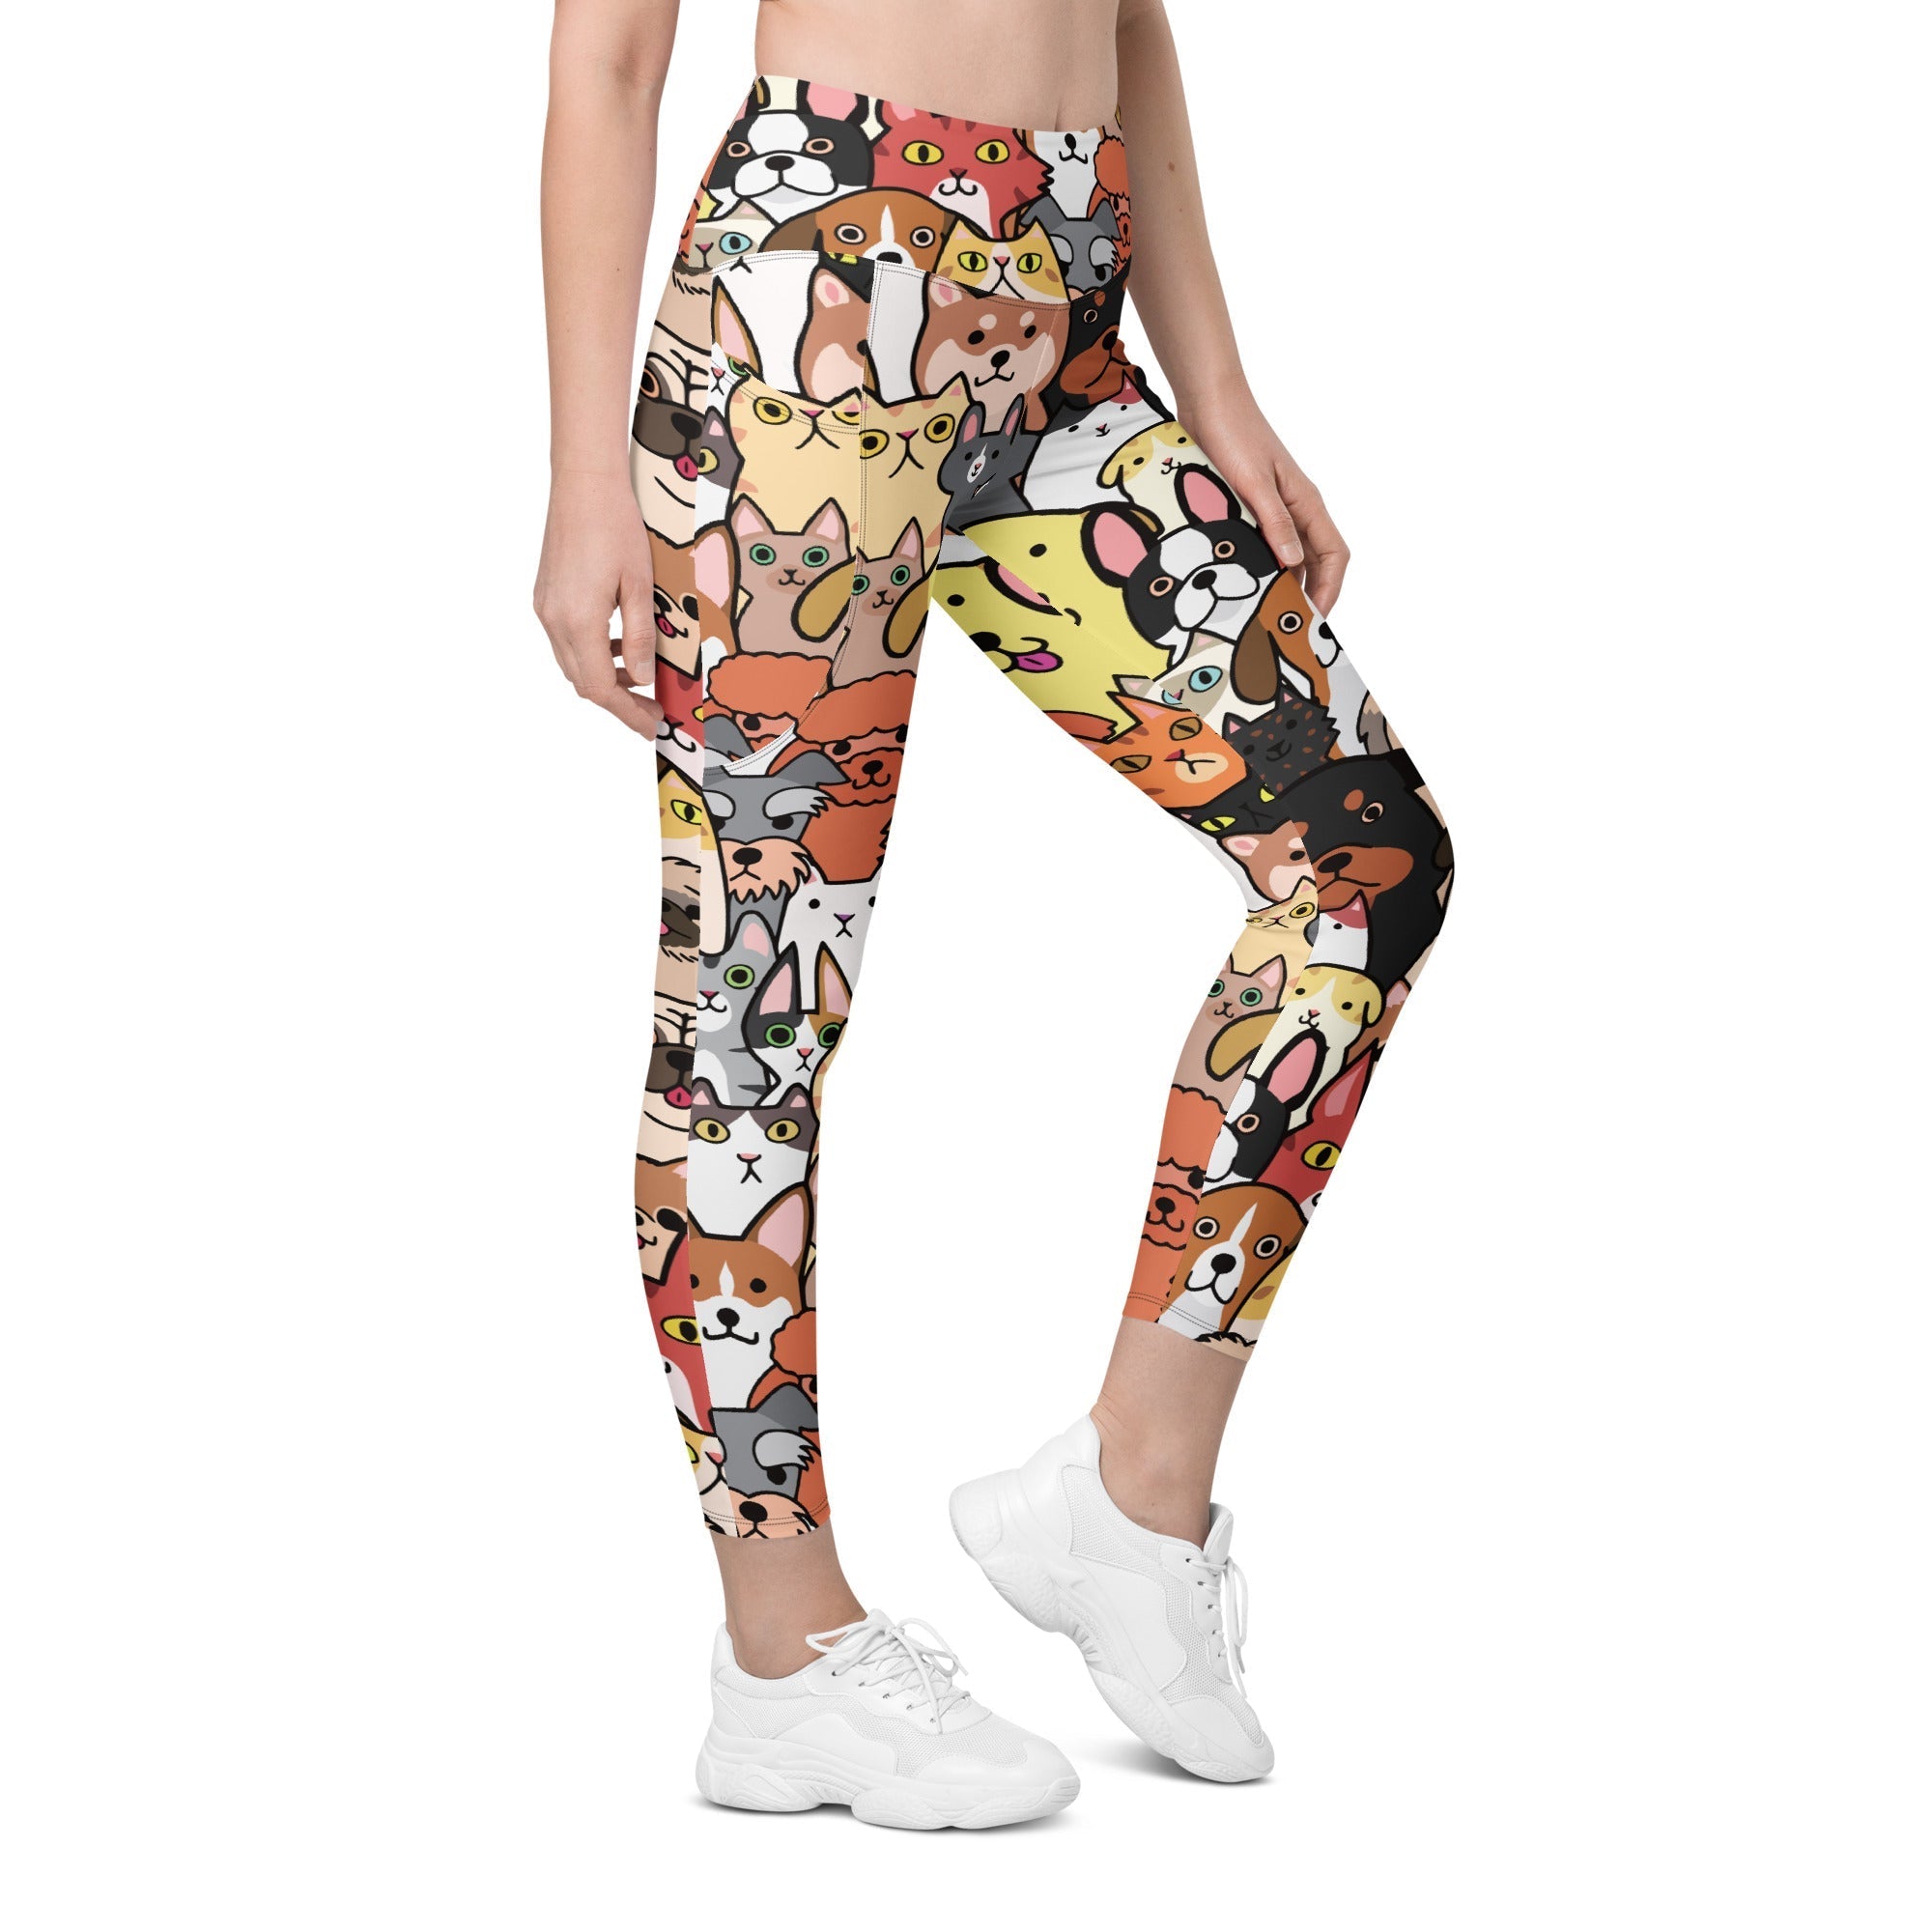 Cuteness Overload Leggings With Pockets